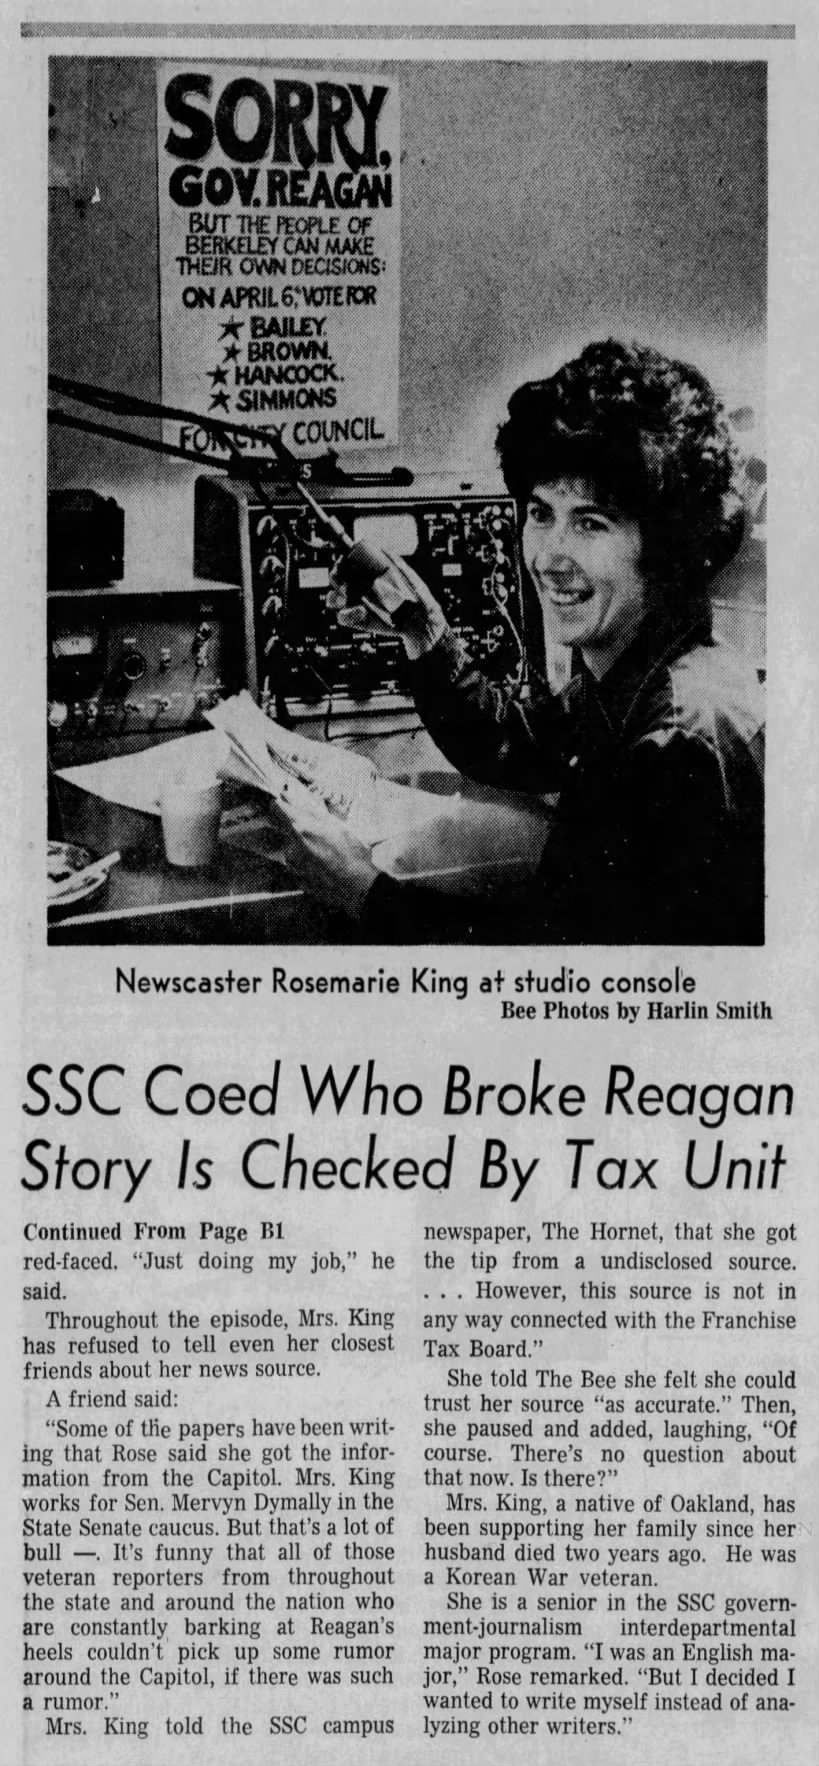 SSC Coed Who Broke Reagan Story Is Checked By Tax Unit